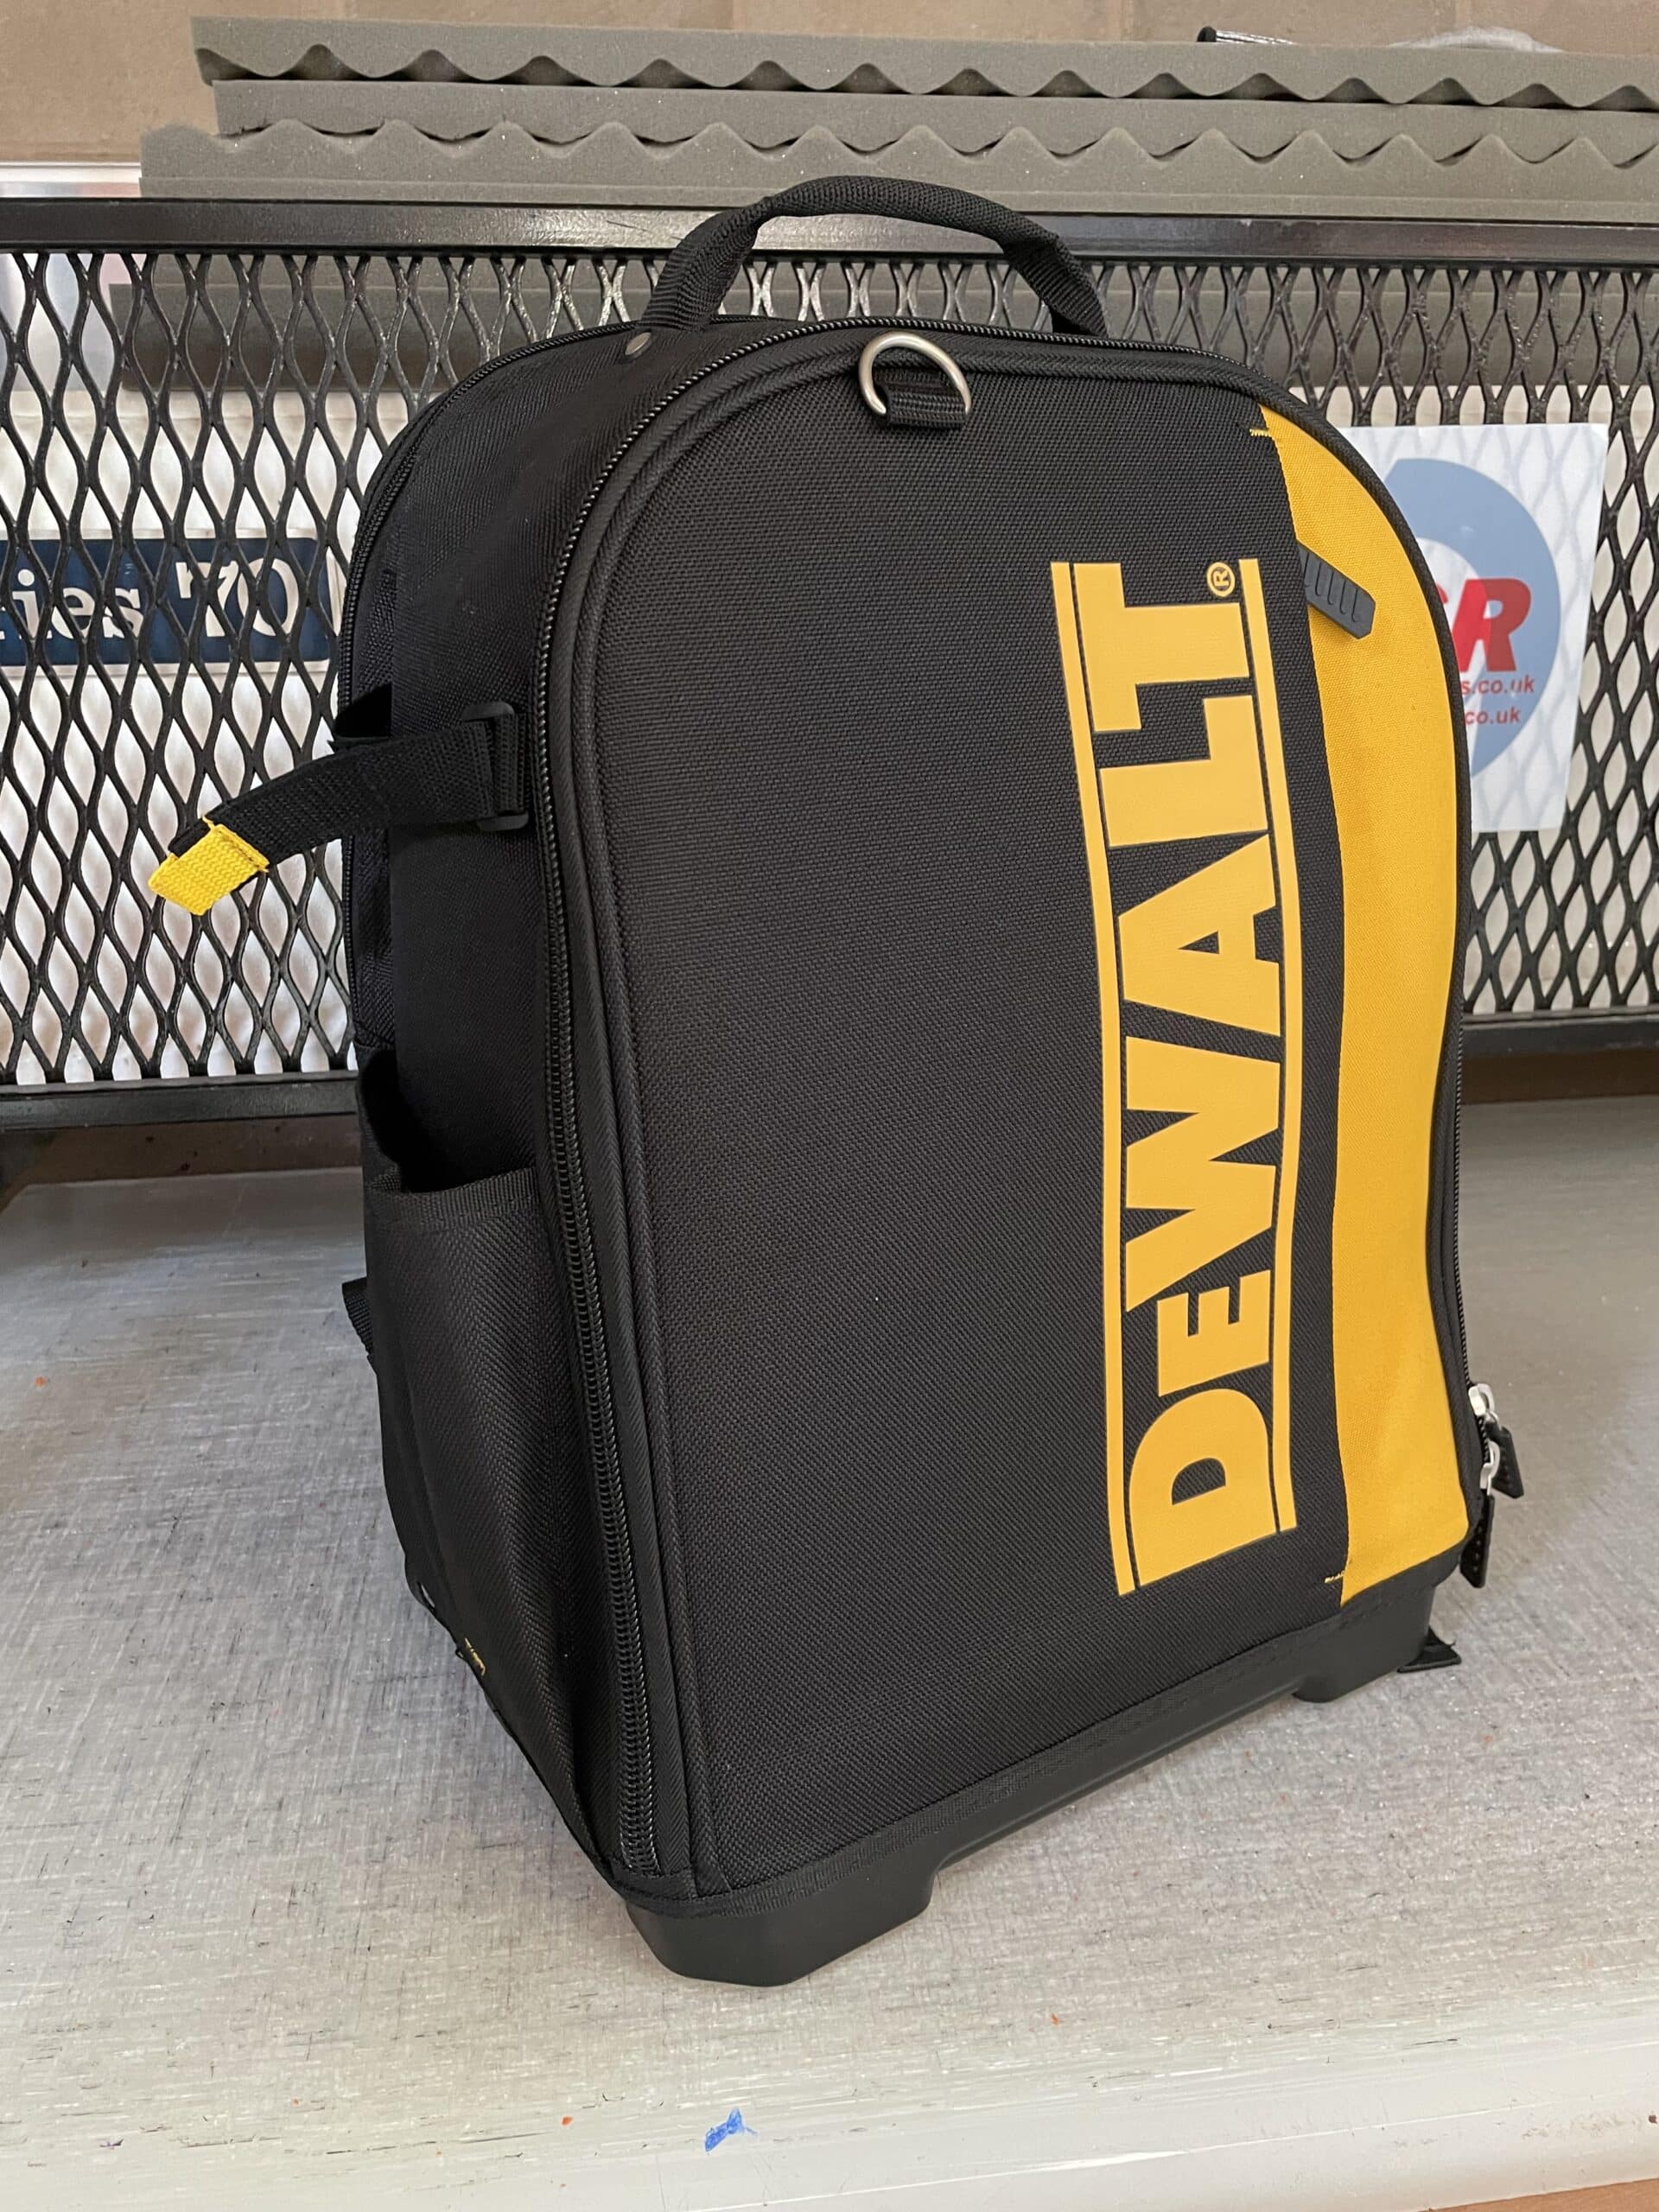 The Dewalt tool bag that we got from our local Costco was a relative snip at around £40